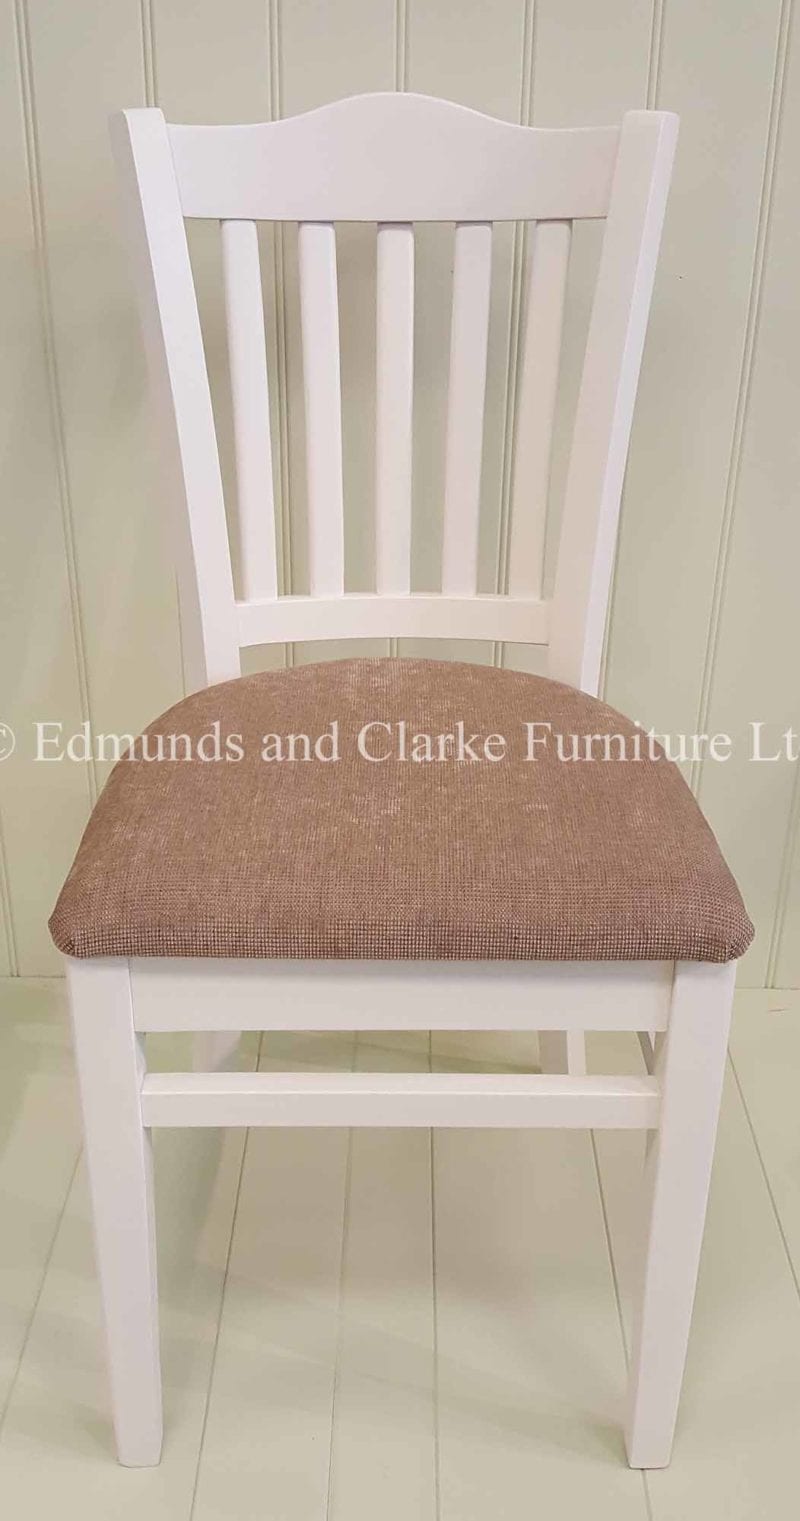 Stamford dining chair painted from our Edmunds collection